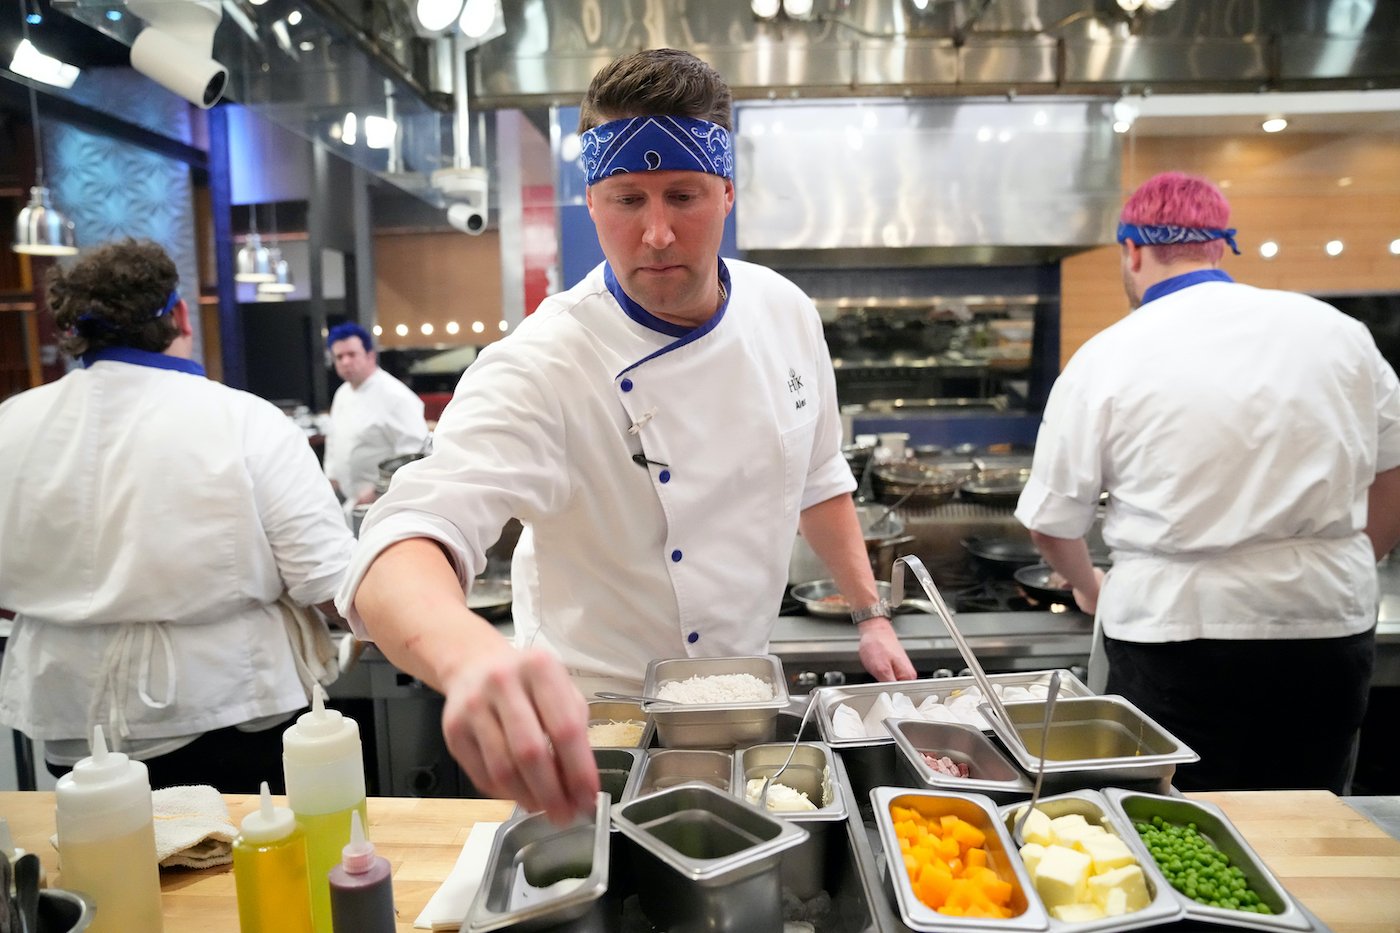 'Hell's Kitchen: Battle of the Ages' winner Alex Belew working in the kitchen 